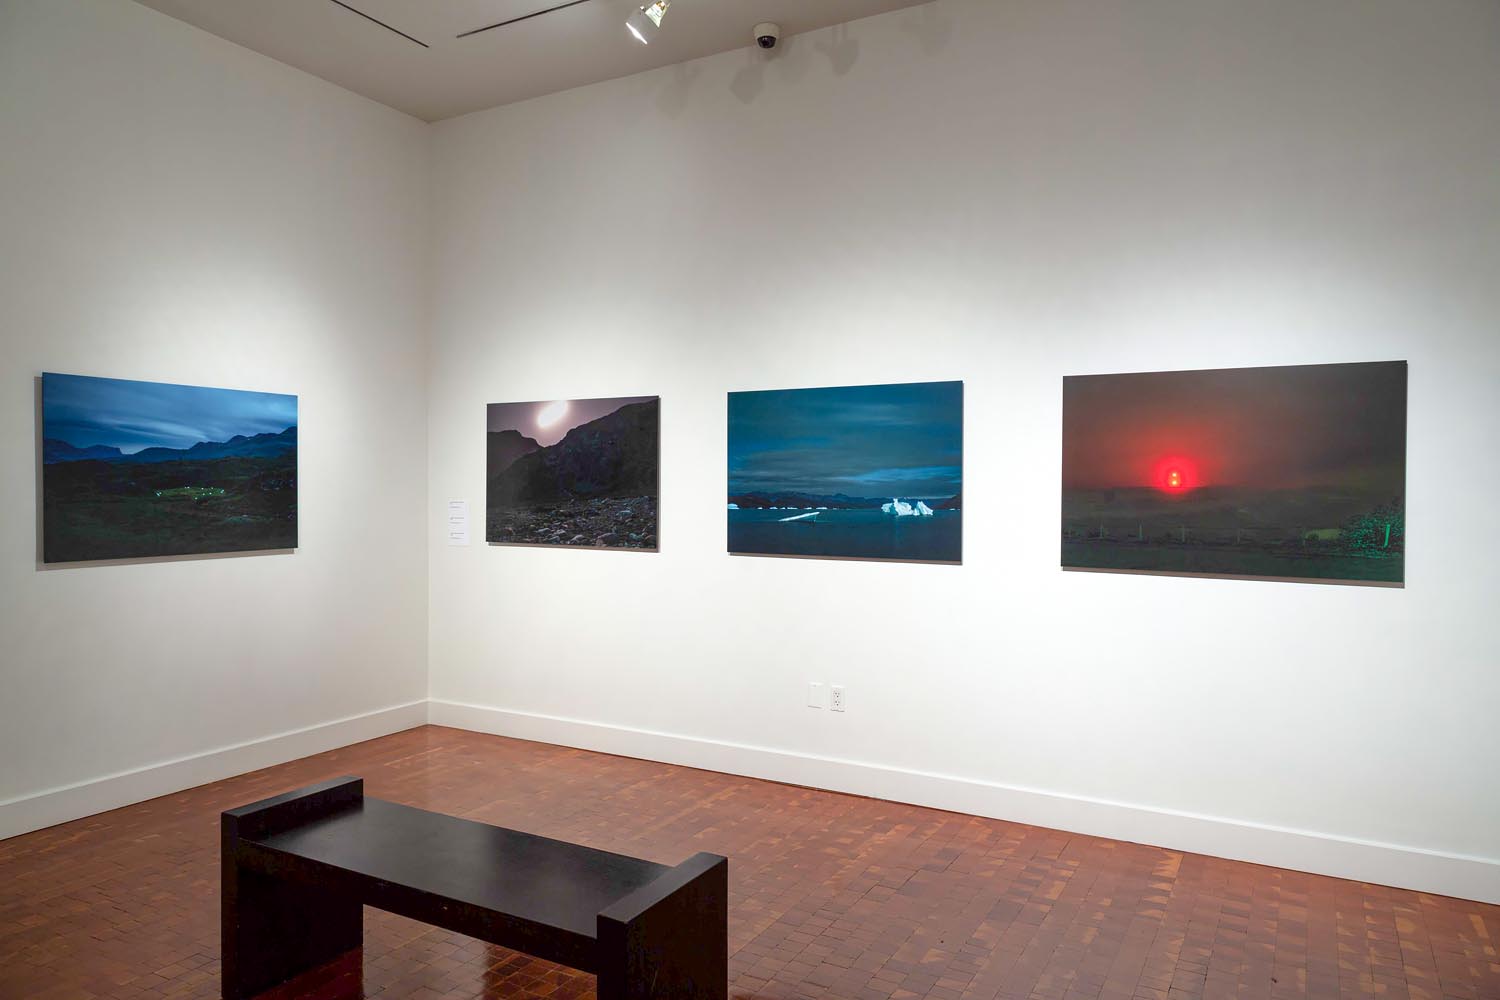 Arctic Edge, Photography Exhibition at Scandinavia House NYC, Night Landscape Photos of Greenland, By Steve Giovinco in Gallery Space with Bench Installation photo by Eileen Travell.